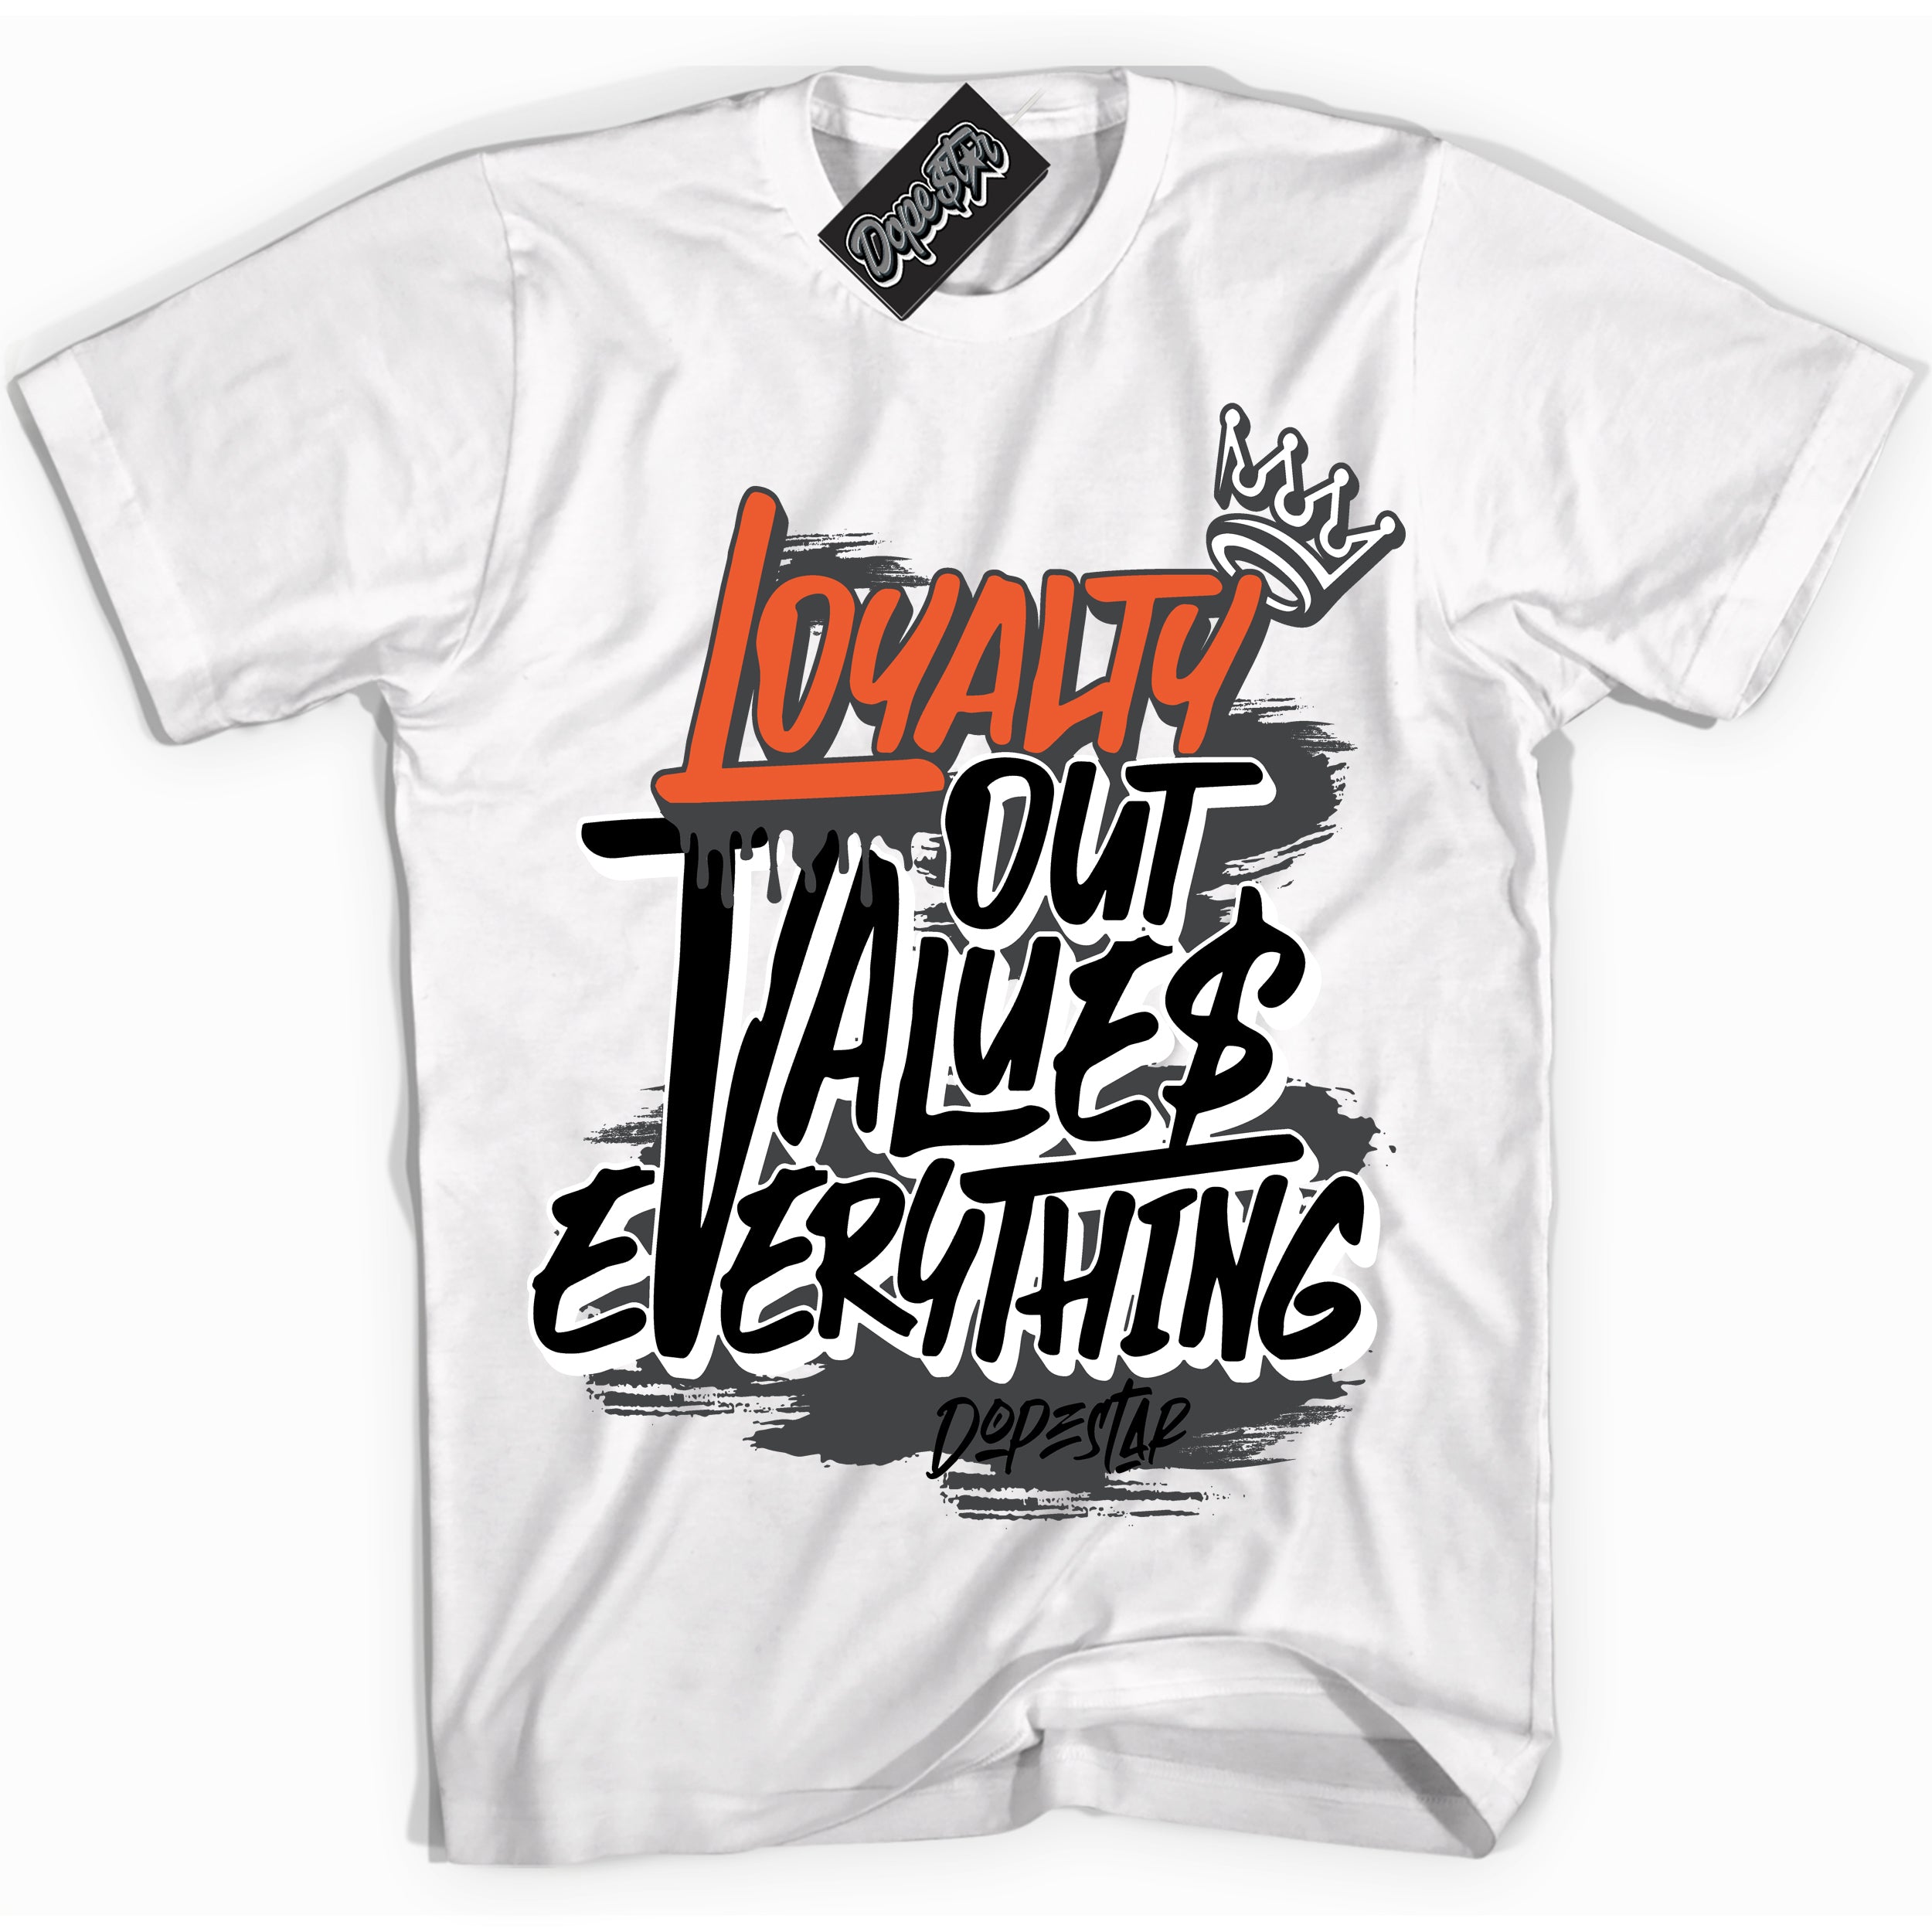 Cool White Shirt with “ Loyalty Out Values Everything” design that perfectly matches Stash 1s Sneakers.